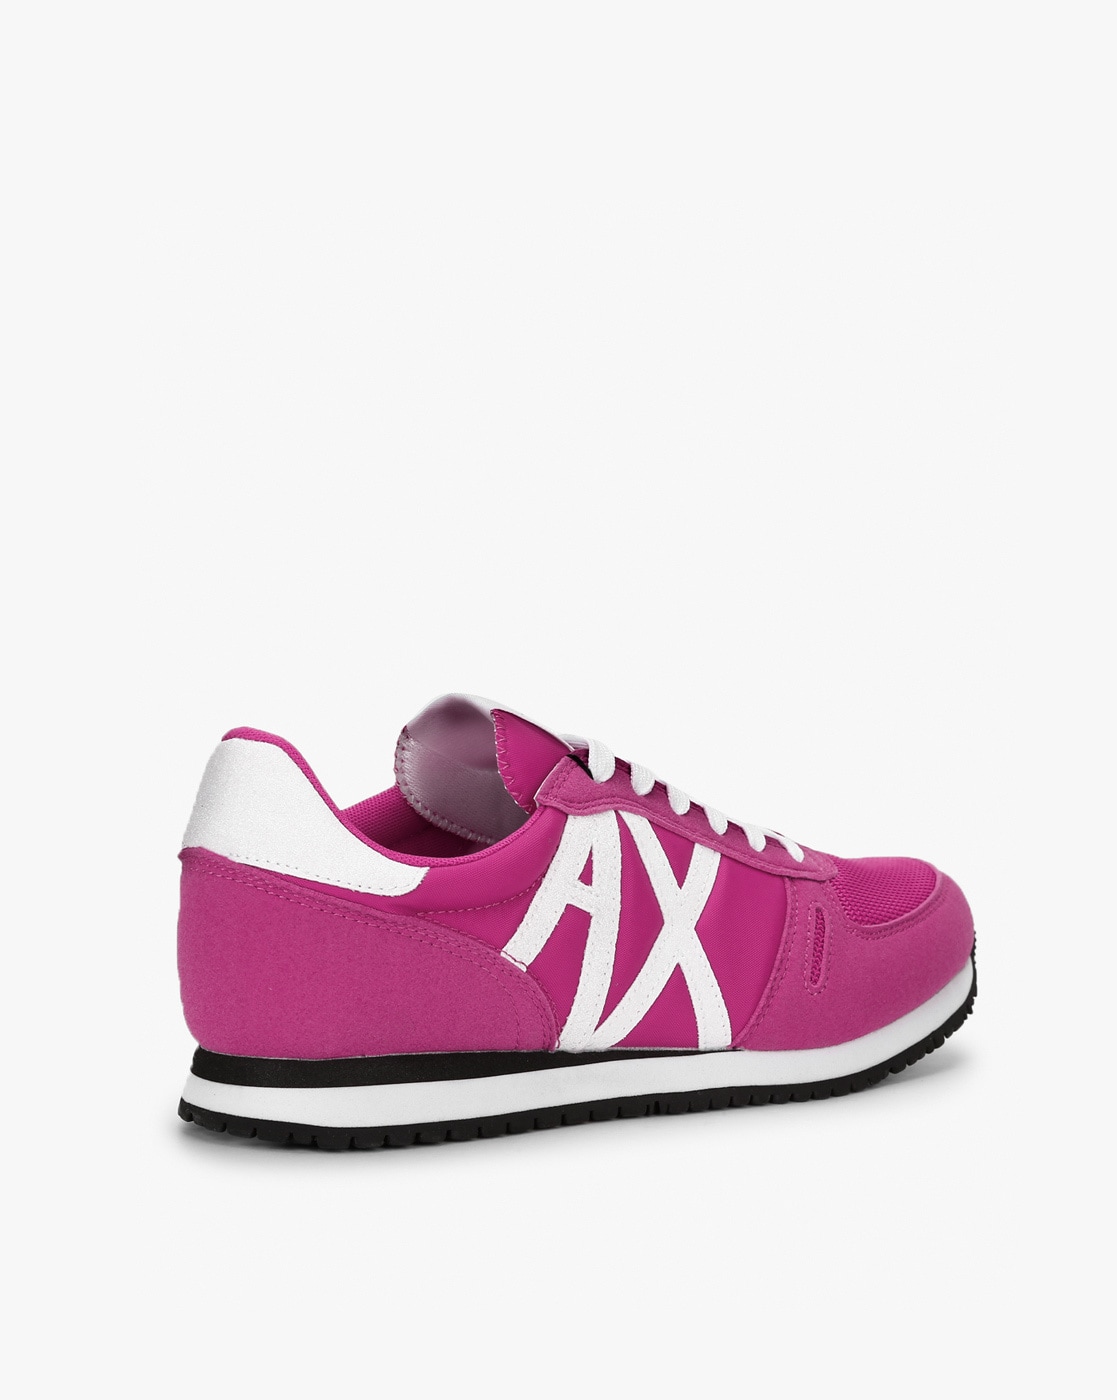 Armani Exchange Logo Charm Leather Sneakers in Black | Lyst